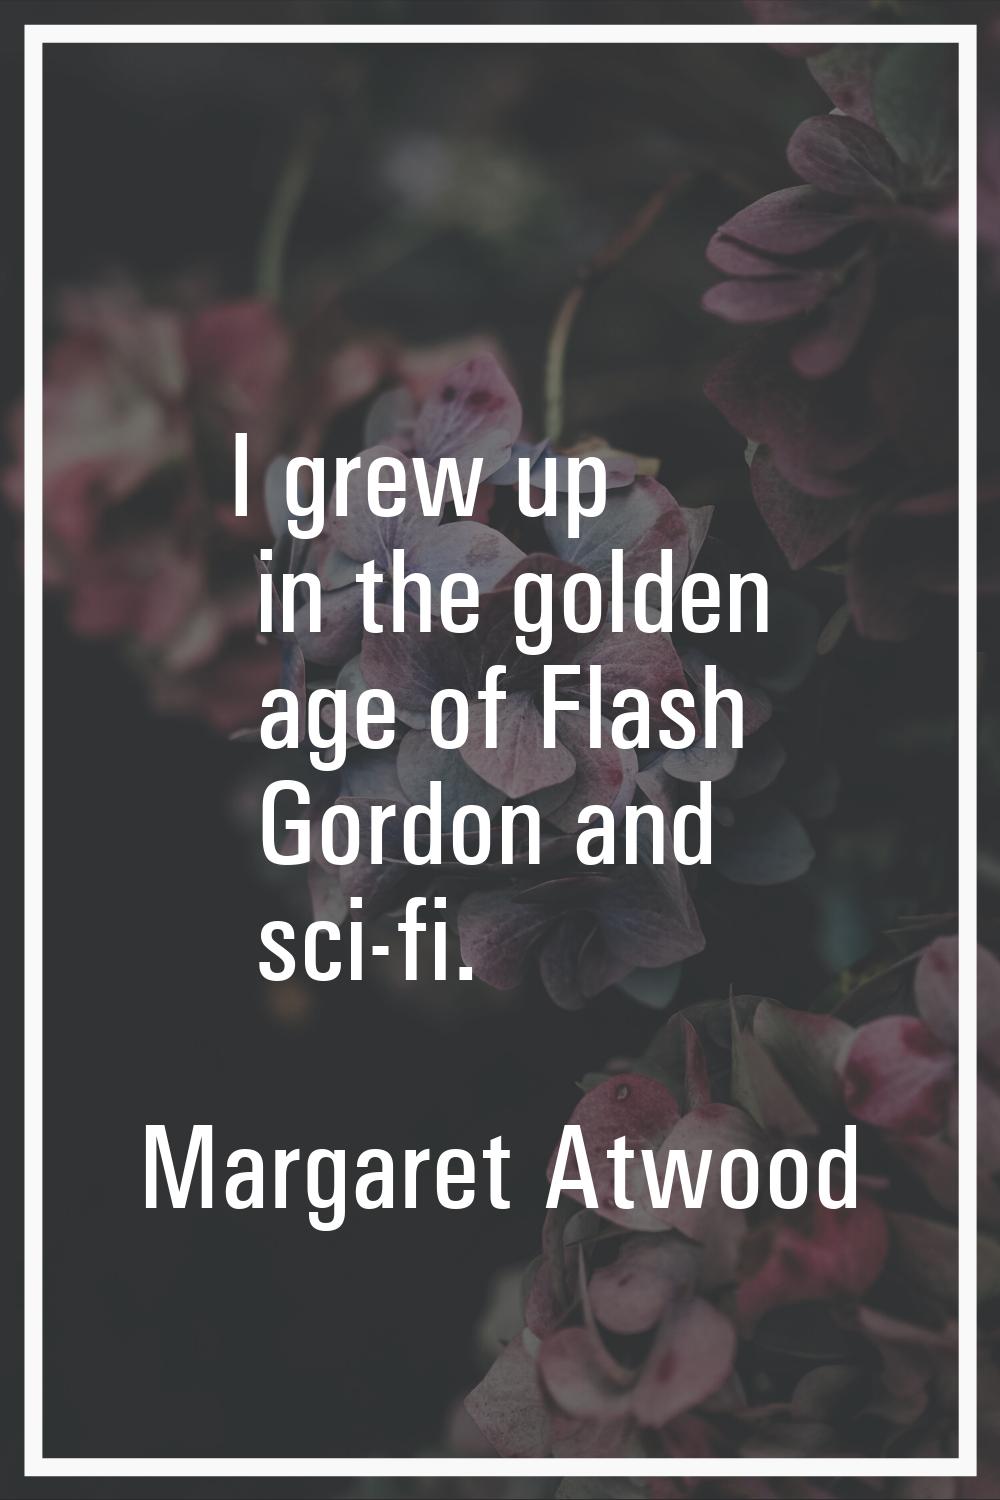 I grew up in the golden age of Flash Gordon and sci-fi.